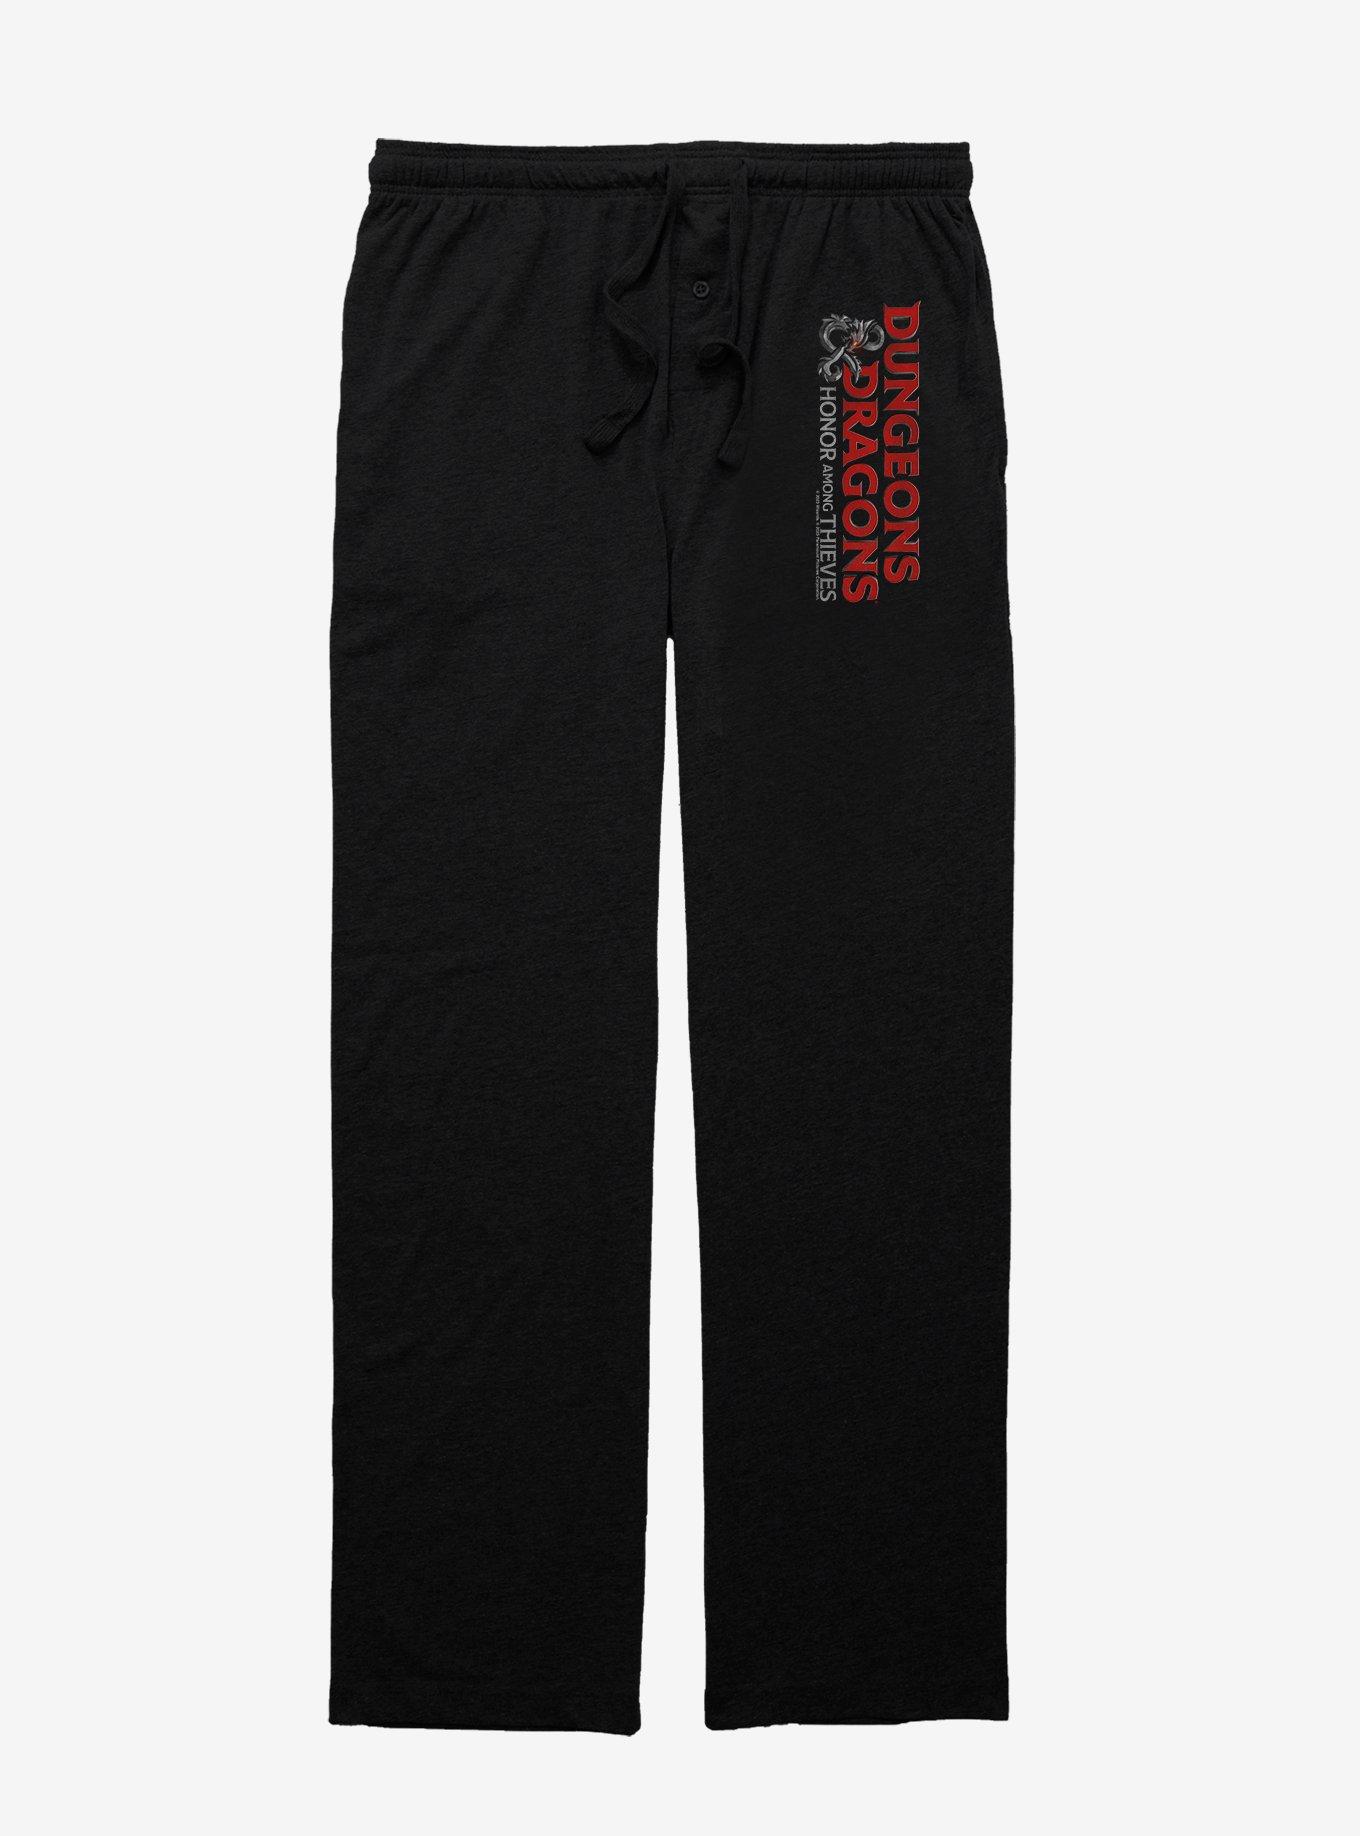 Dungeons & Dragons: Honor Among Thieves Movie Title Pajama Pants - BLACK